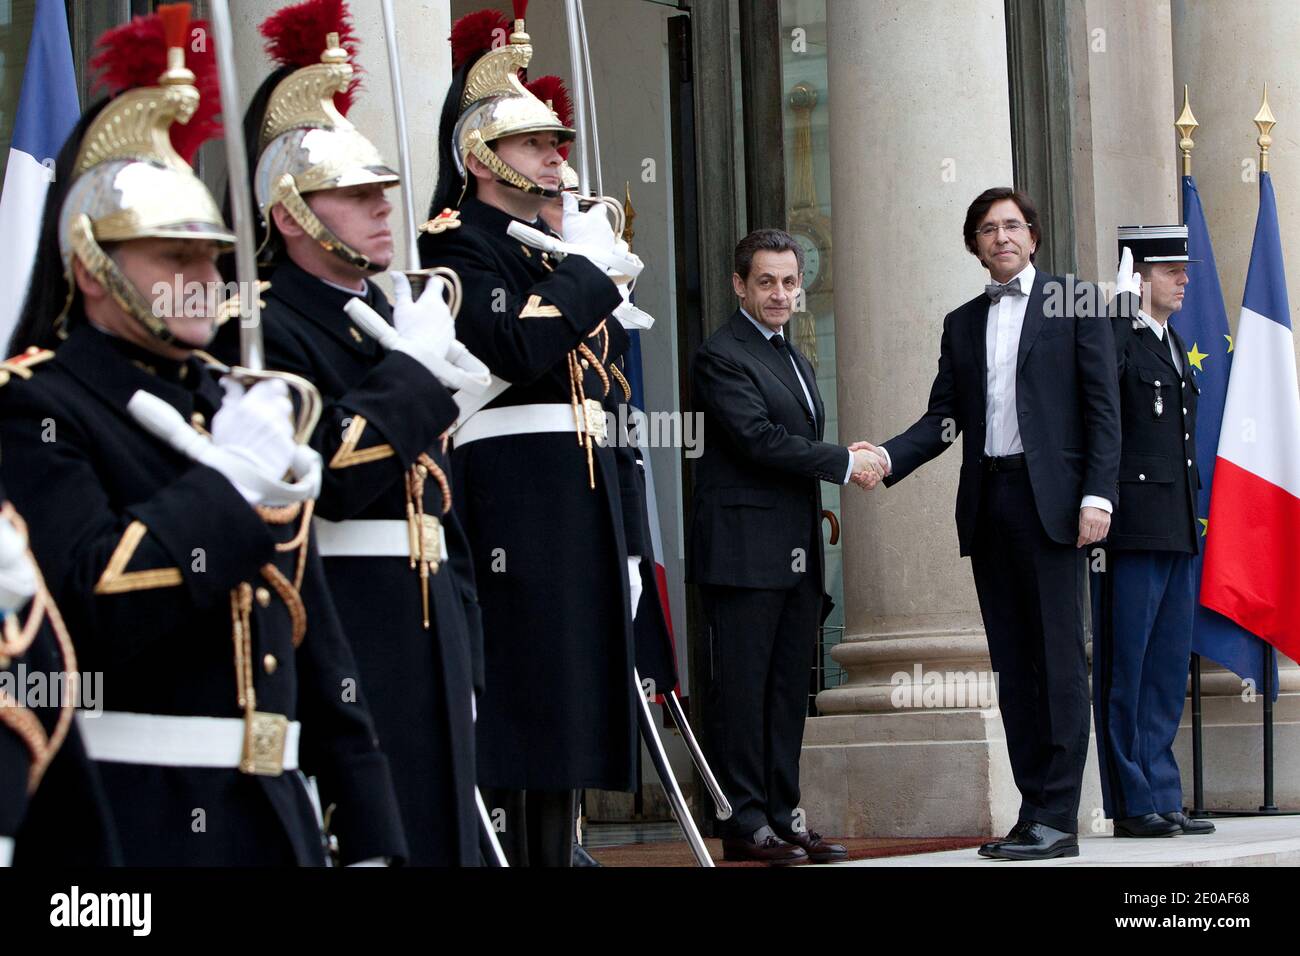 French President Nicolas Sarkozy shakes hands with Belgium Prime Minister Elio Di Rupo prior to a meeting at the Elysee Palace, in Paris, France on February 24, 2012. Photo by Stephane Lemouton/ABACAPRESS.COM. Stock Photo